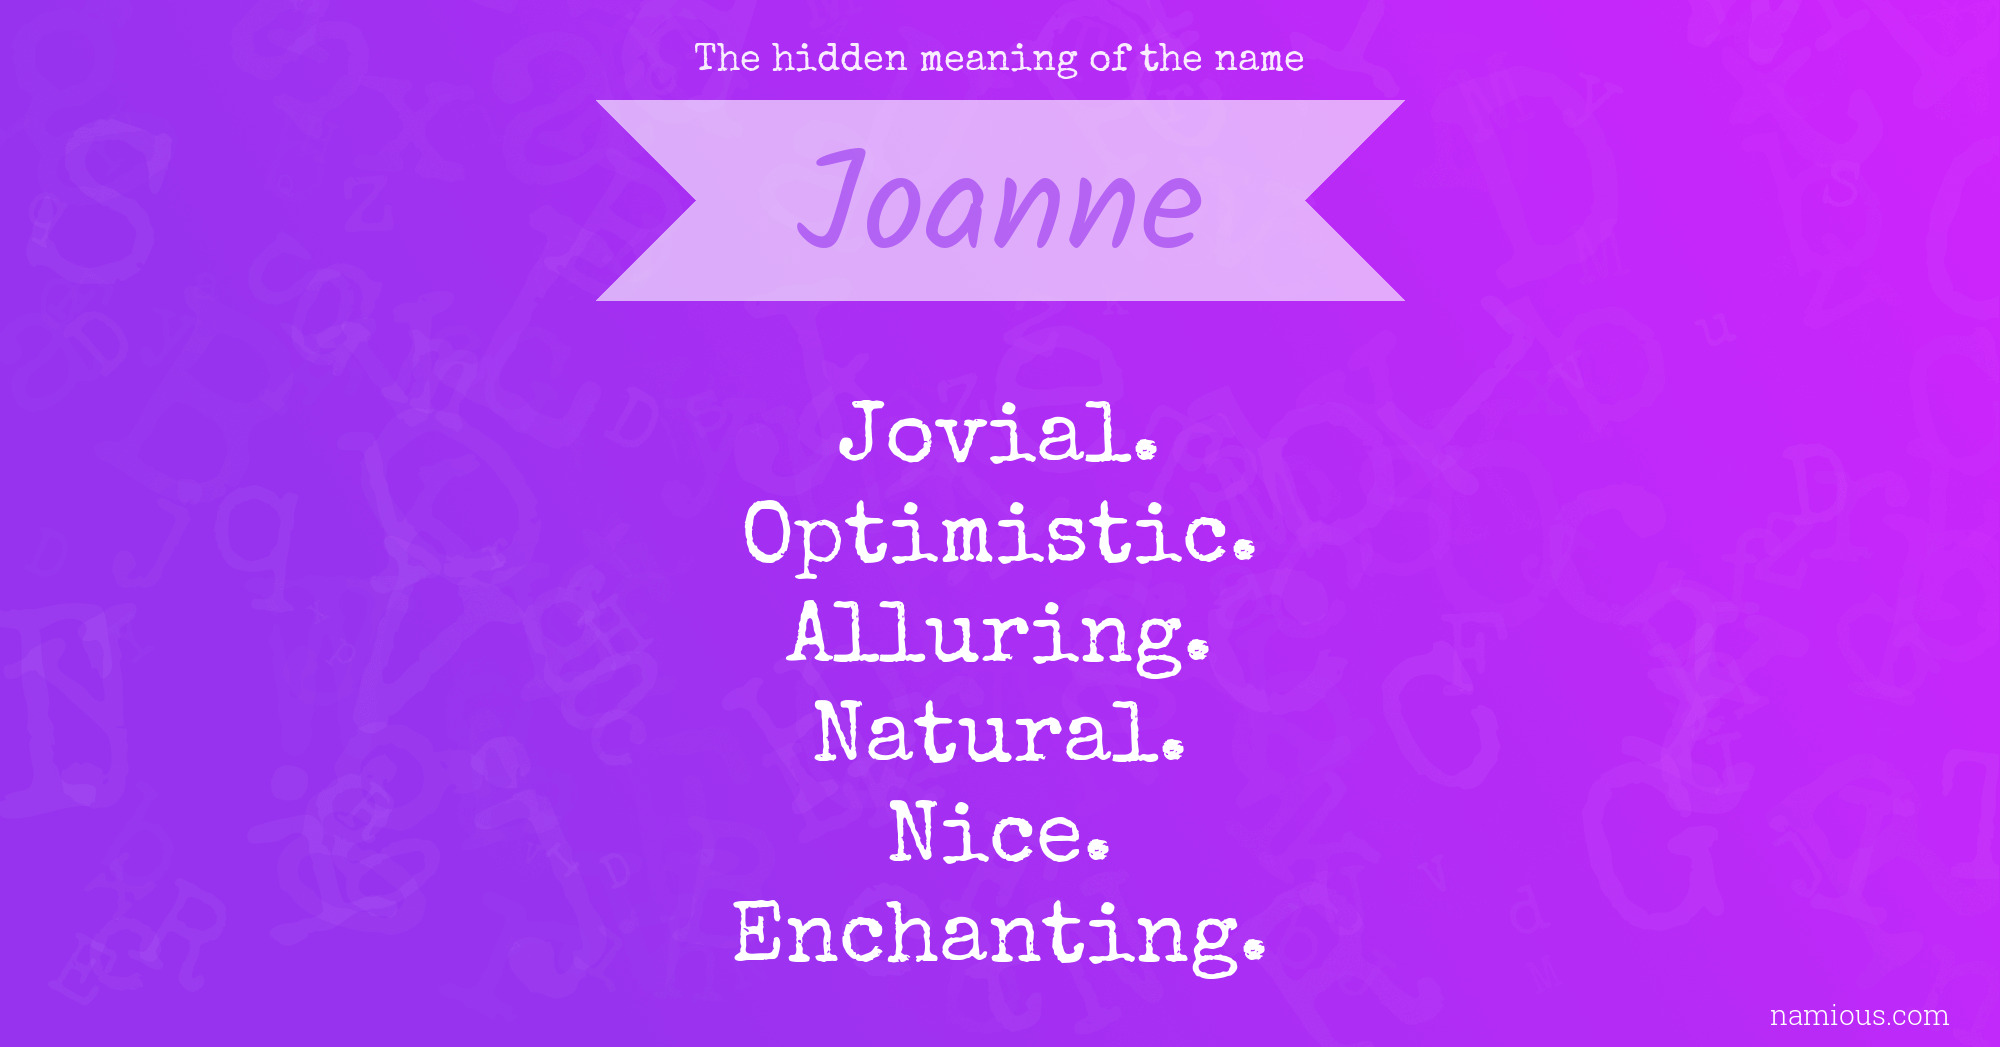 The hidden meaning of the name Joanne